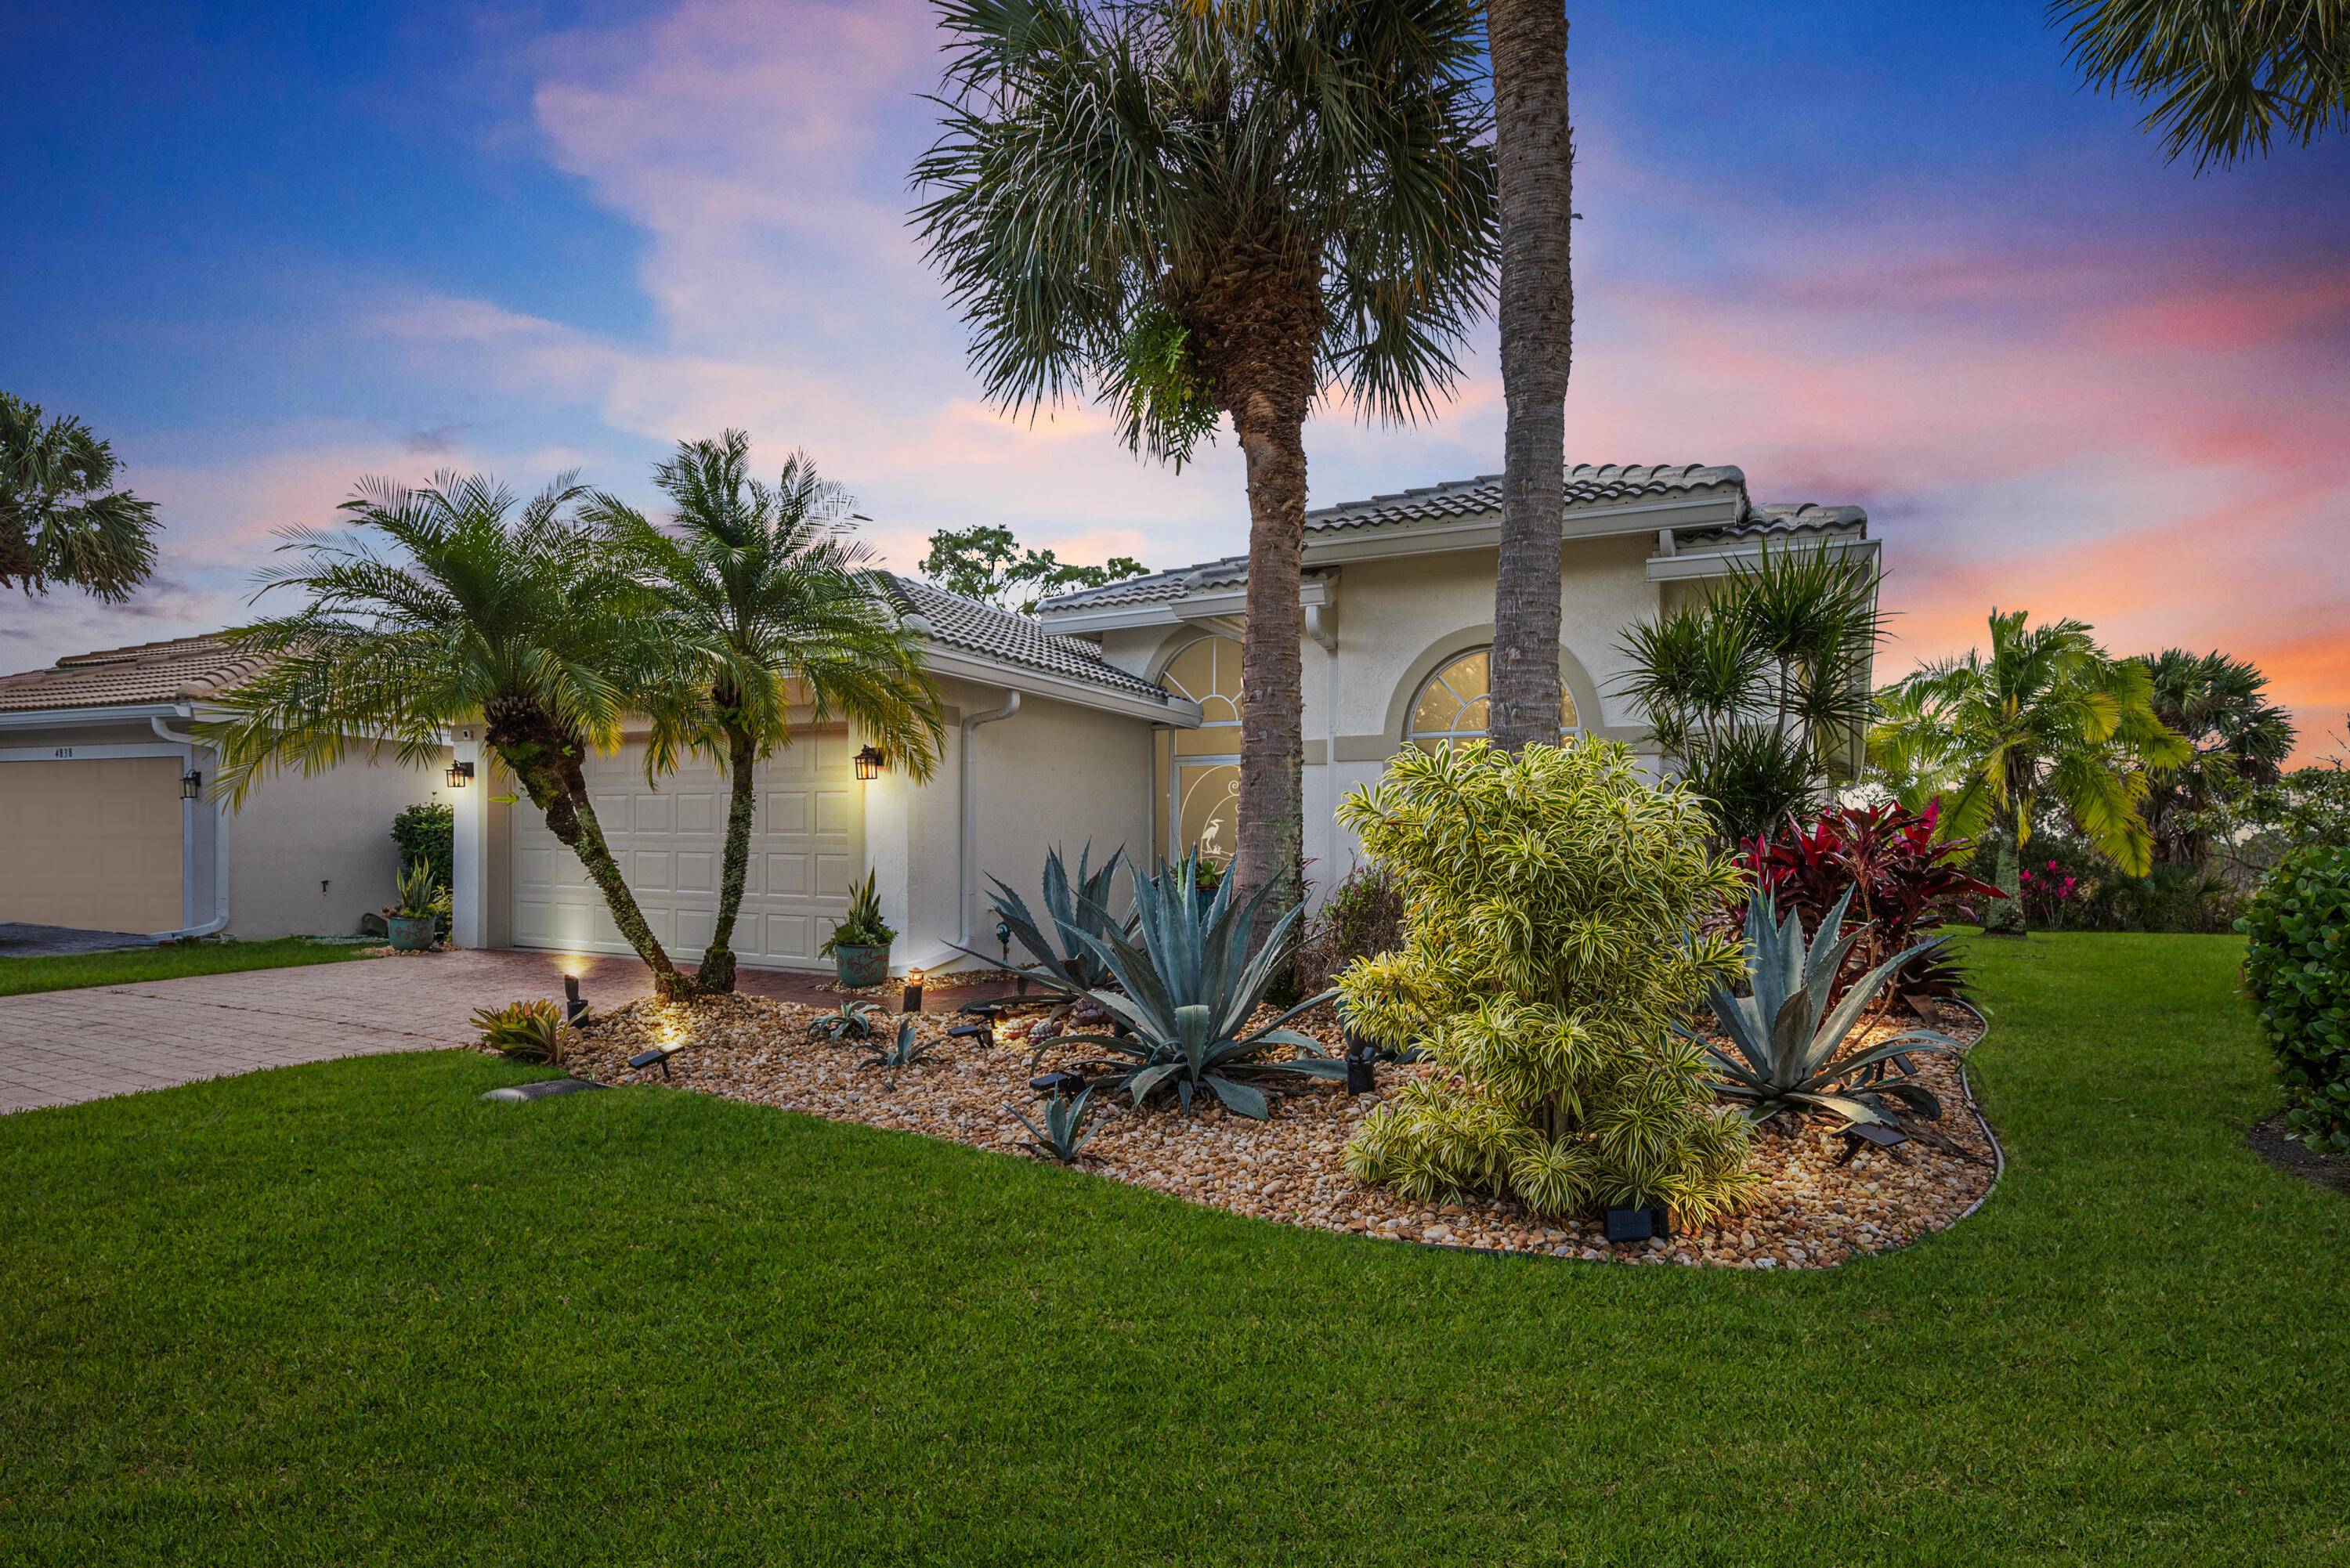 Perfectly maintained Patio home featuring 3 bedrooms, 2 bathrooms, and a 2 car garage, with serene oasis preserve views !